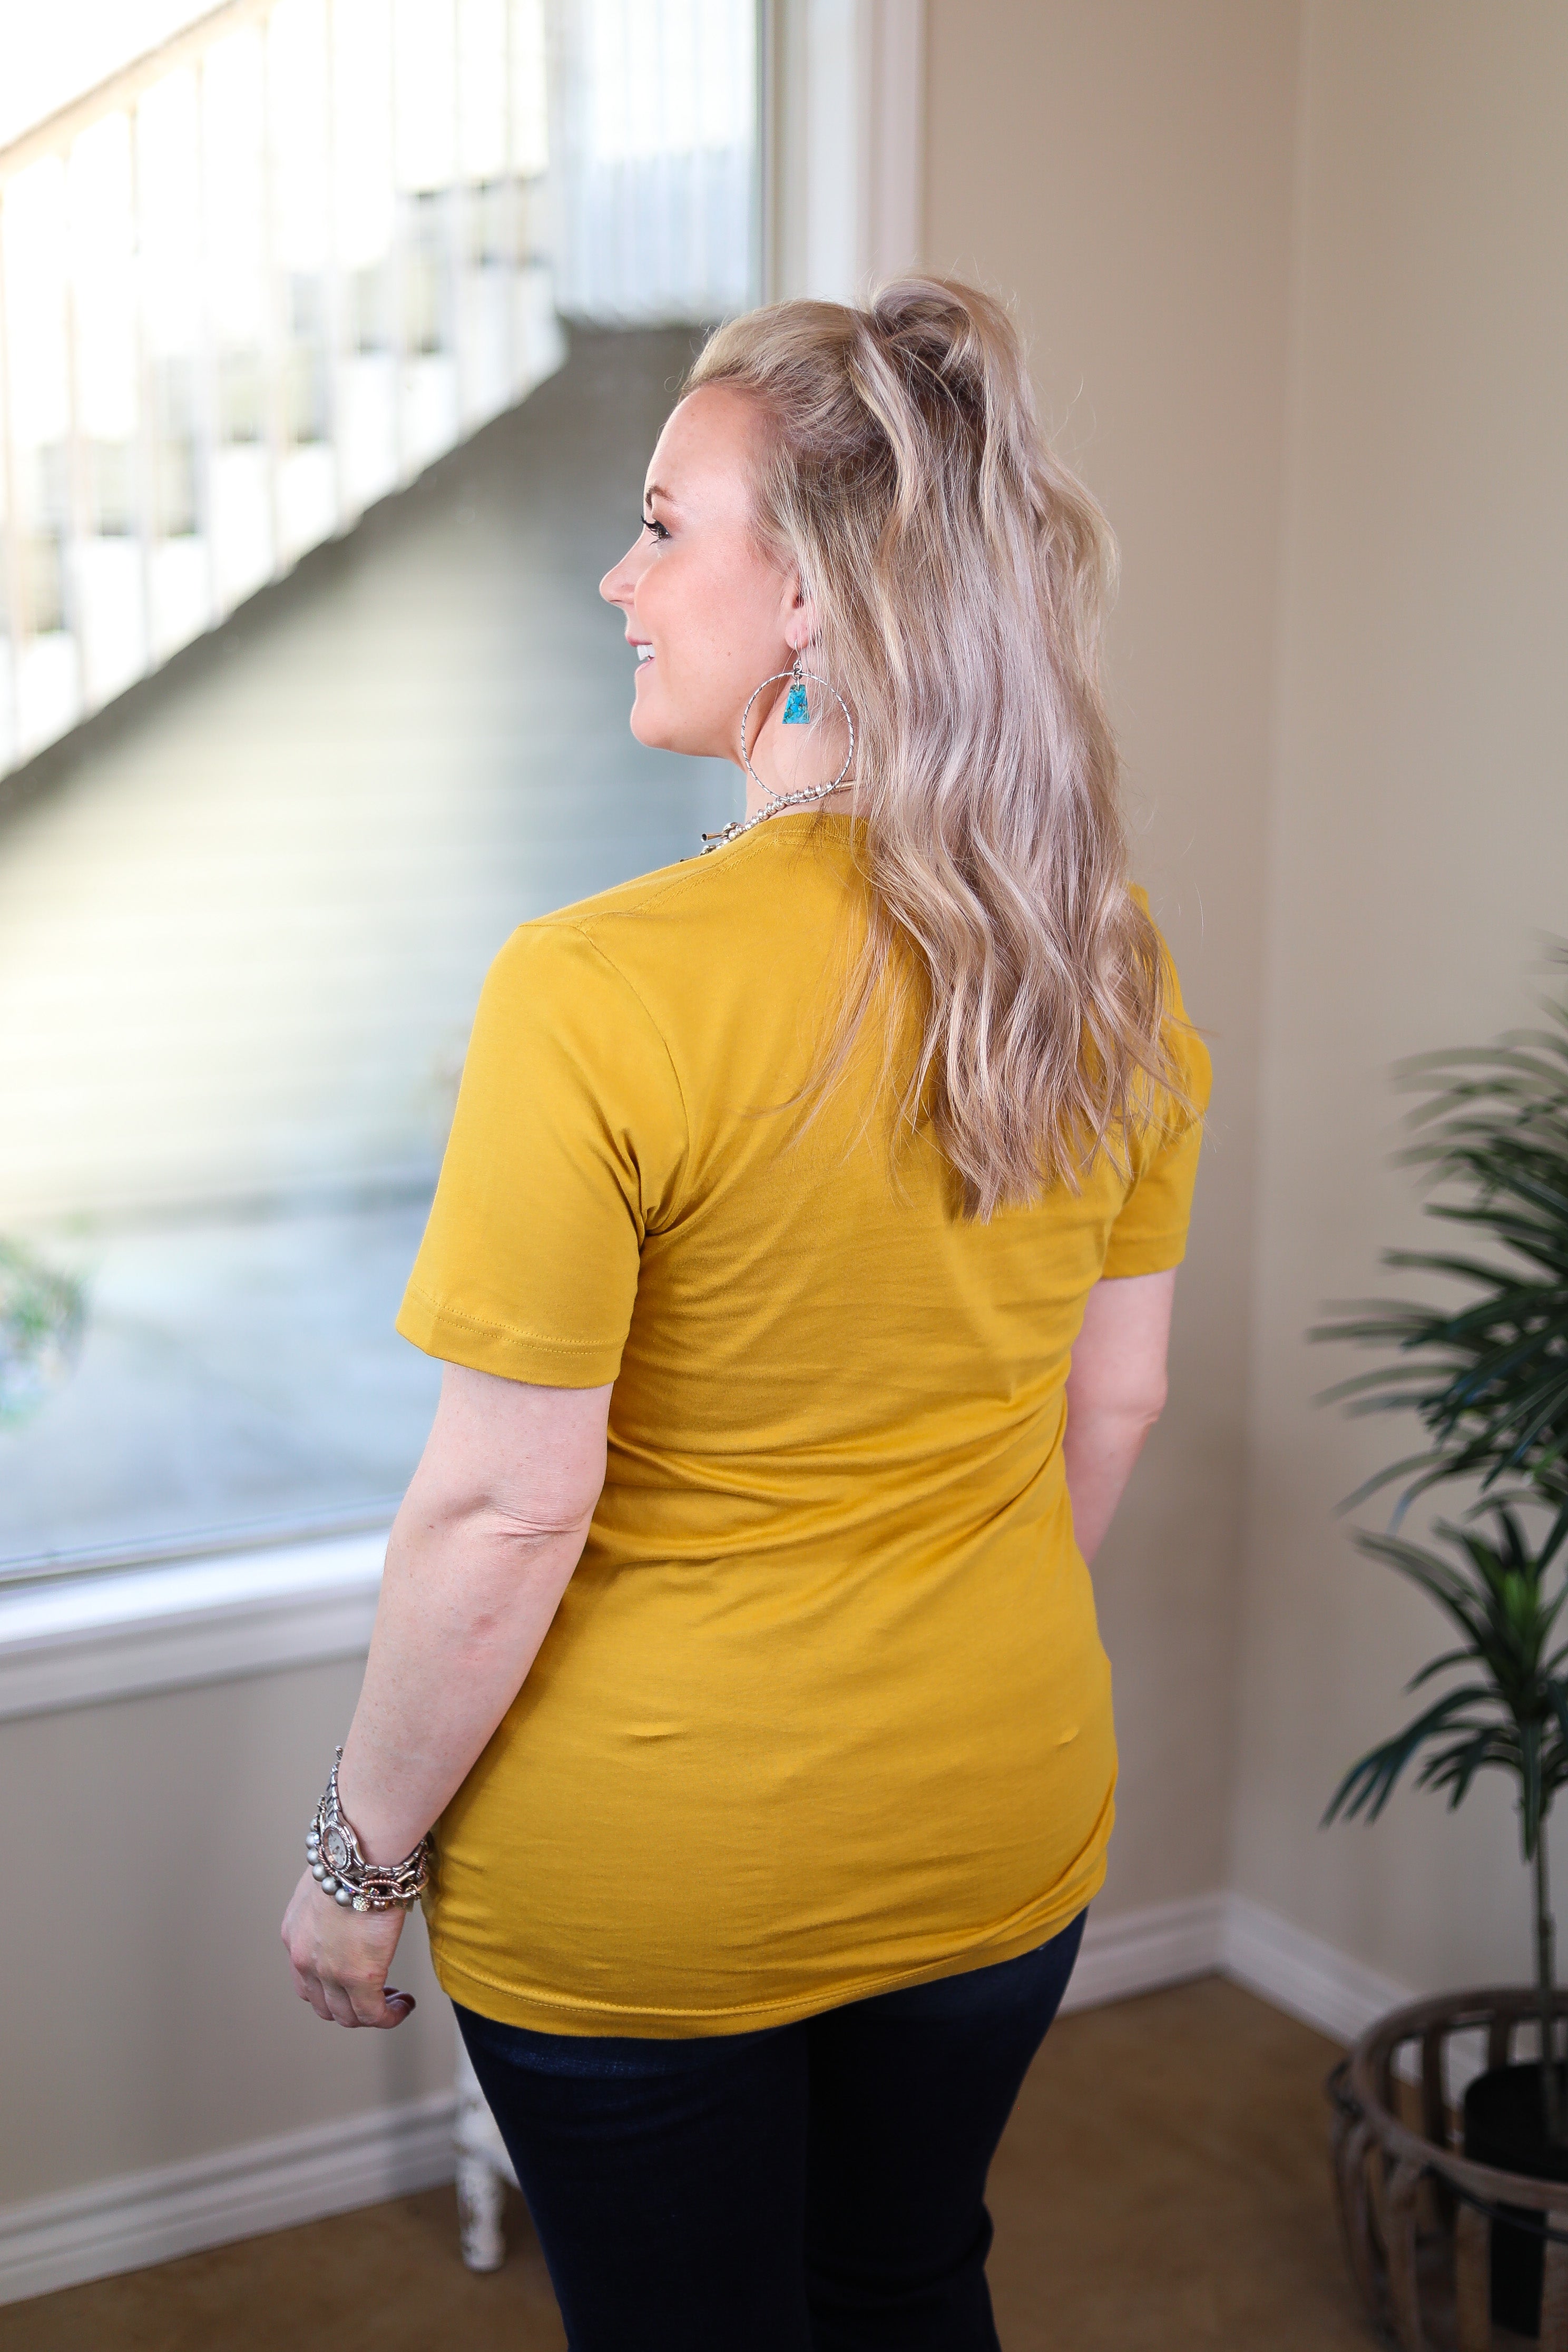 Last Chance Size 2XL | Free Spirit Vintage Western Short Sleeve Tee Shirt in Mustard Yellow - Giddy Up Glamour Boutique